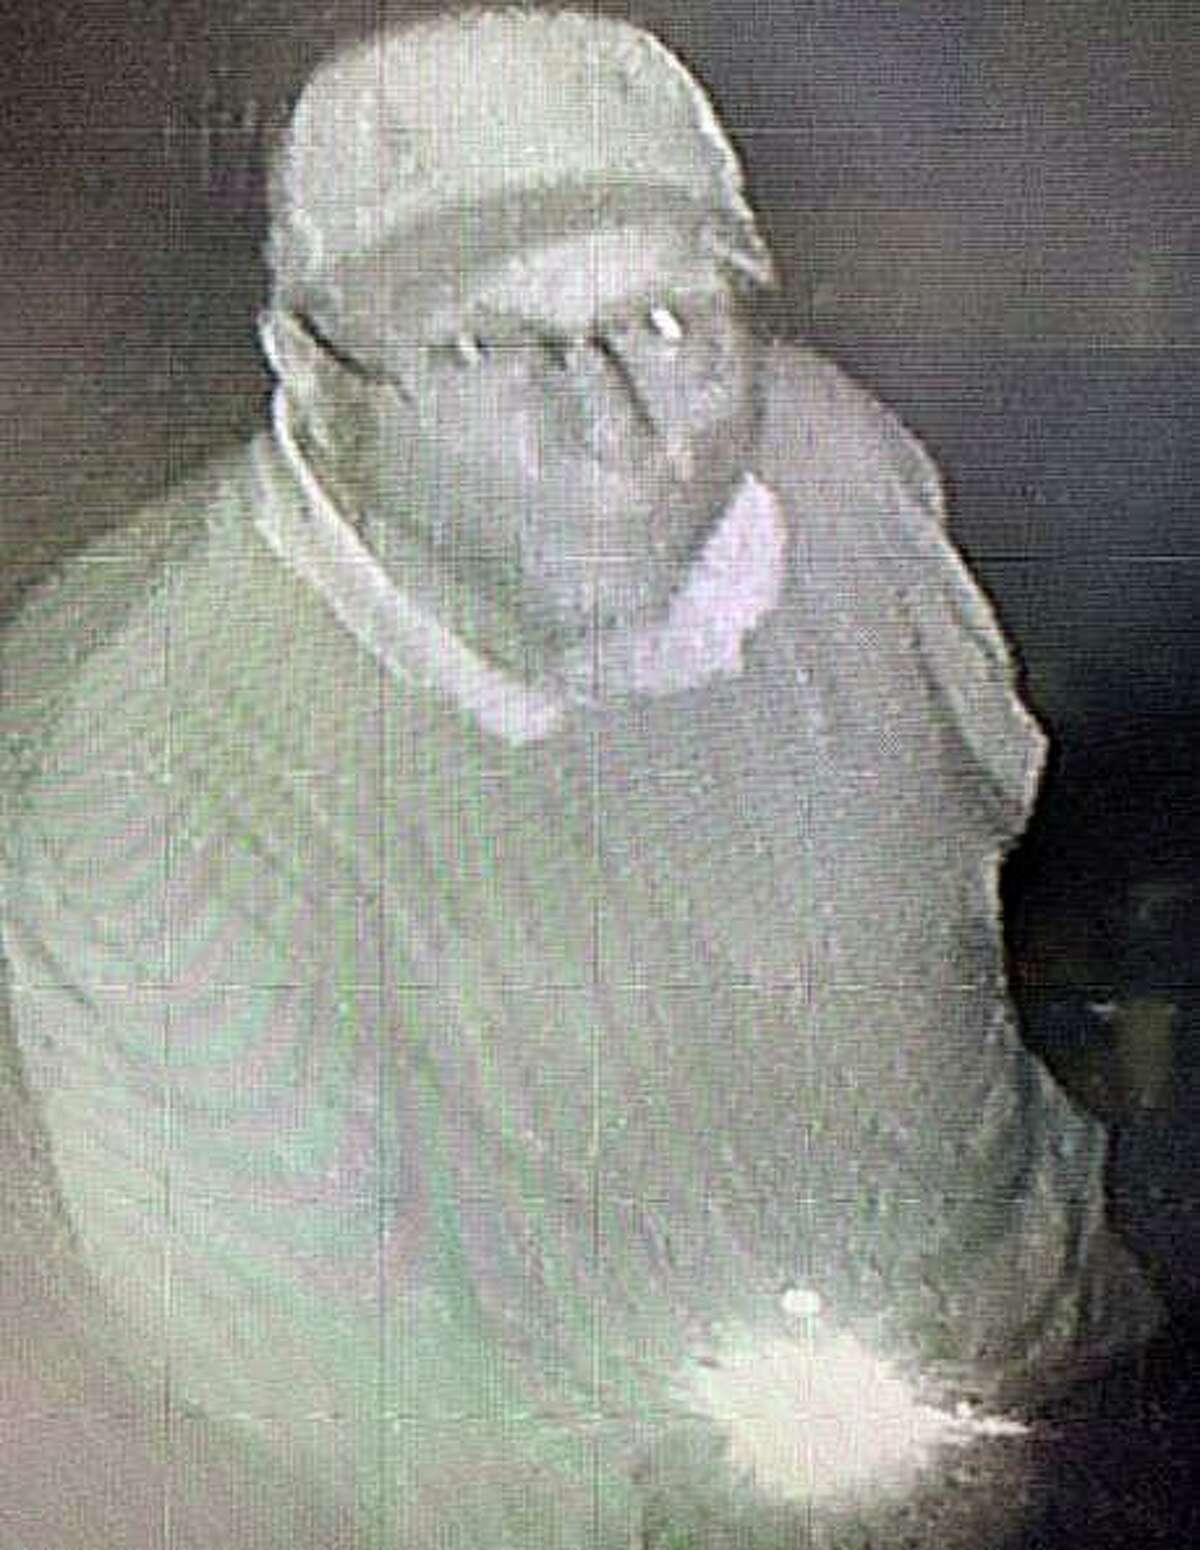 State Police are looking for a man who tried to steal boxes of meat from a Connecticut banquet hall. At around 10:30 p.m. Tuesday, Sept. 24, 2019 police responded to an active alarm at Aria Banquet Hall, at 45 Murphy Road in Prospect.